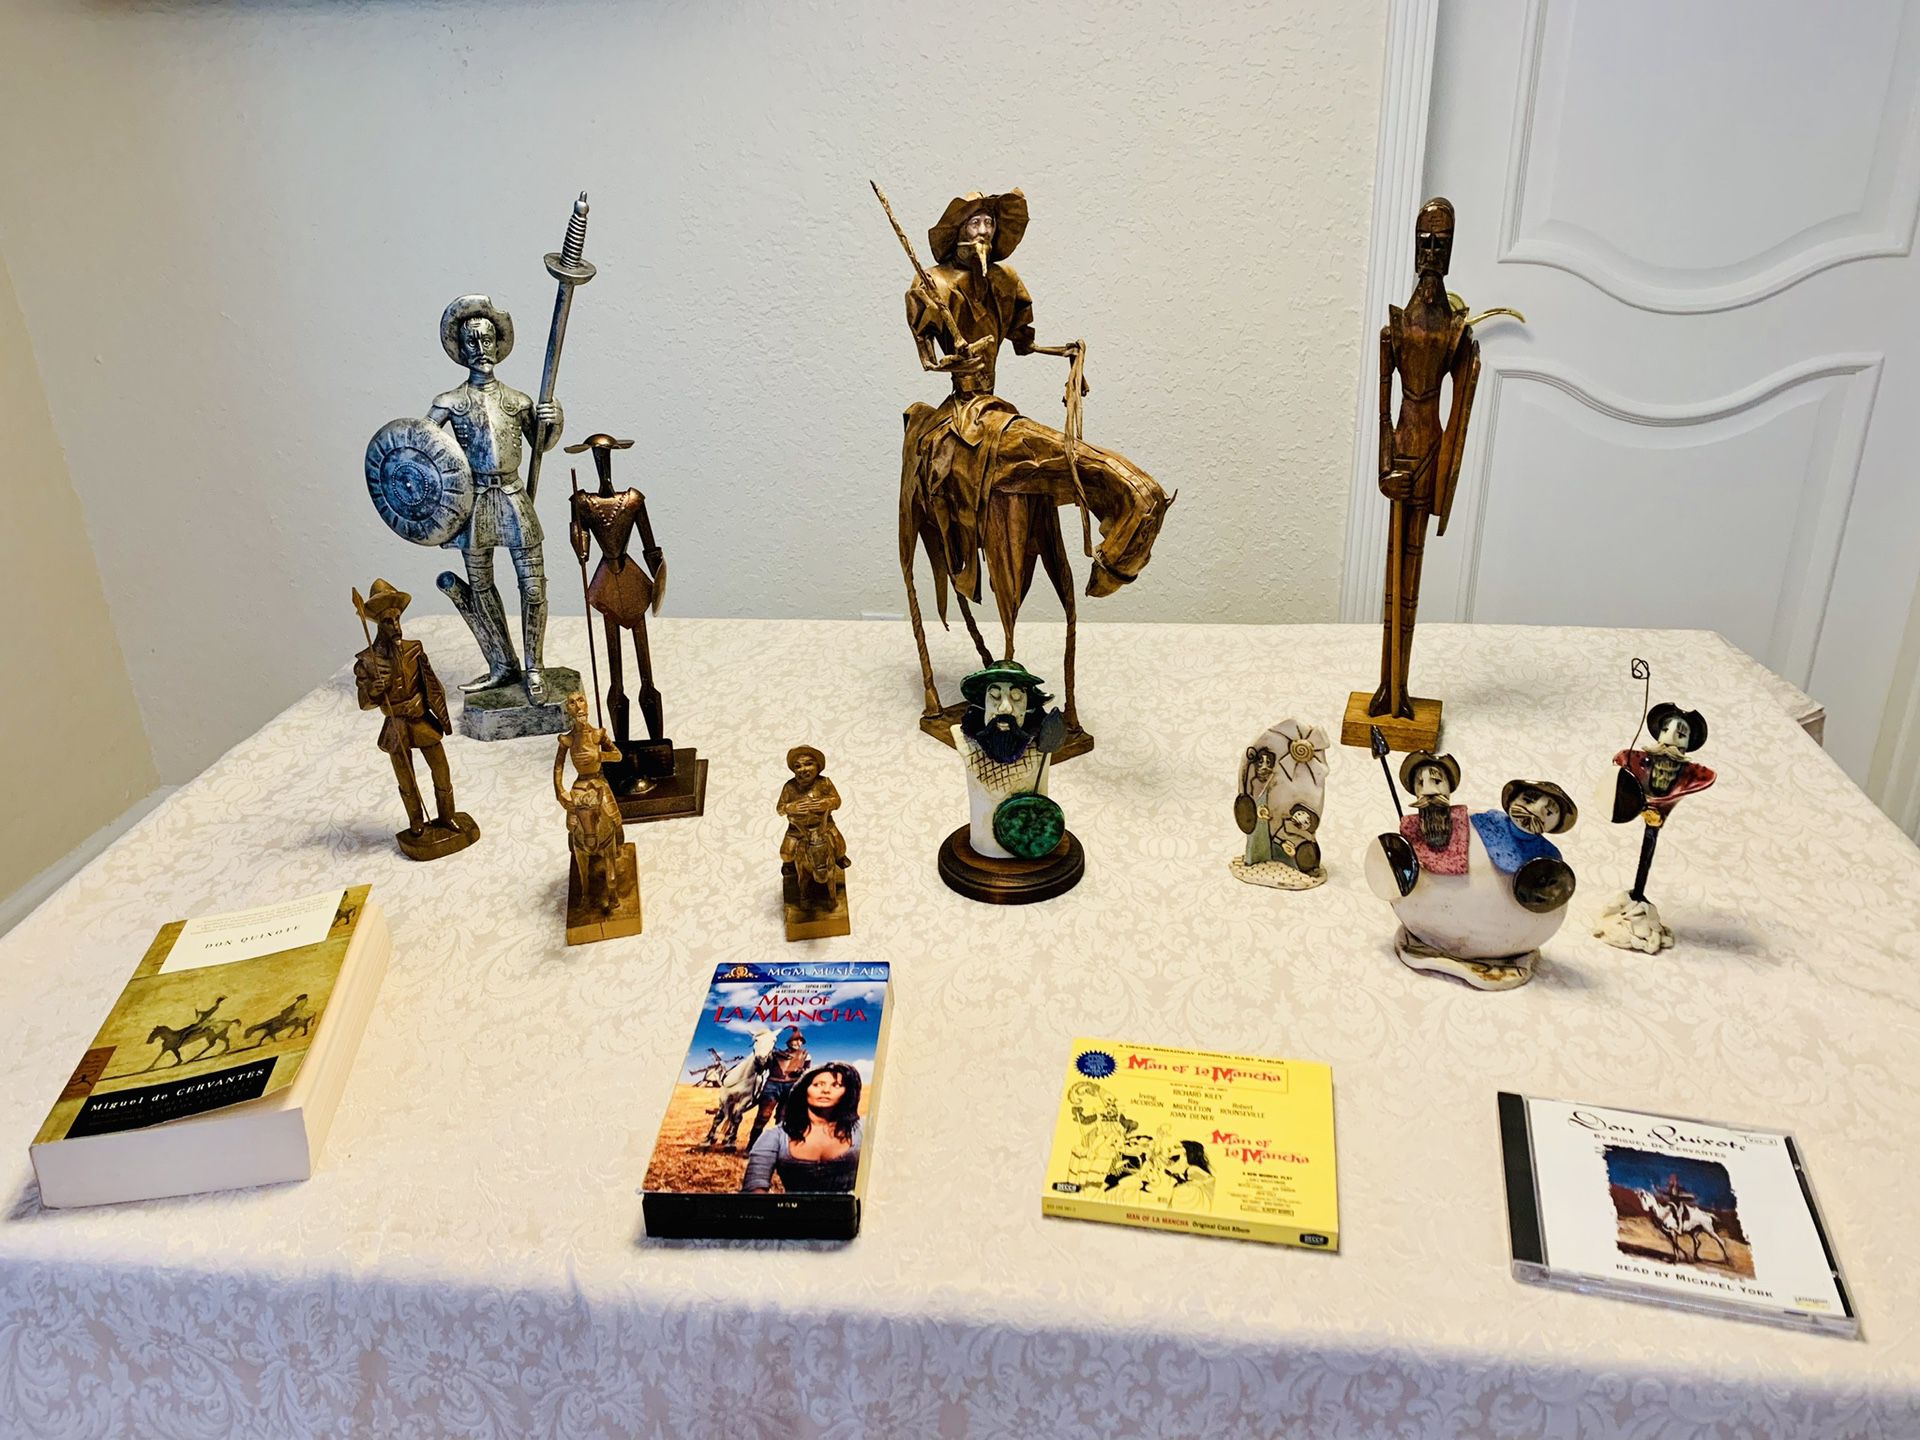 Don Quixote & Sancho Panchez Vintage collection of Figurines. Will sell as complete set $250 or Any offer accepted!